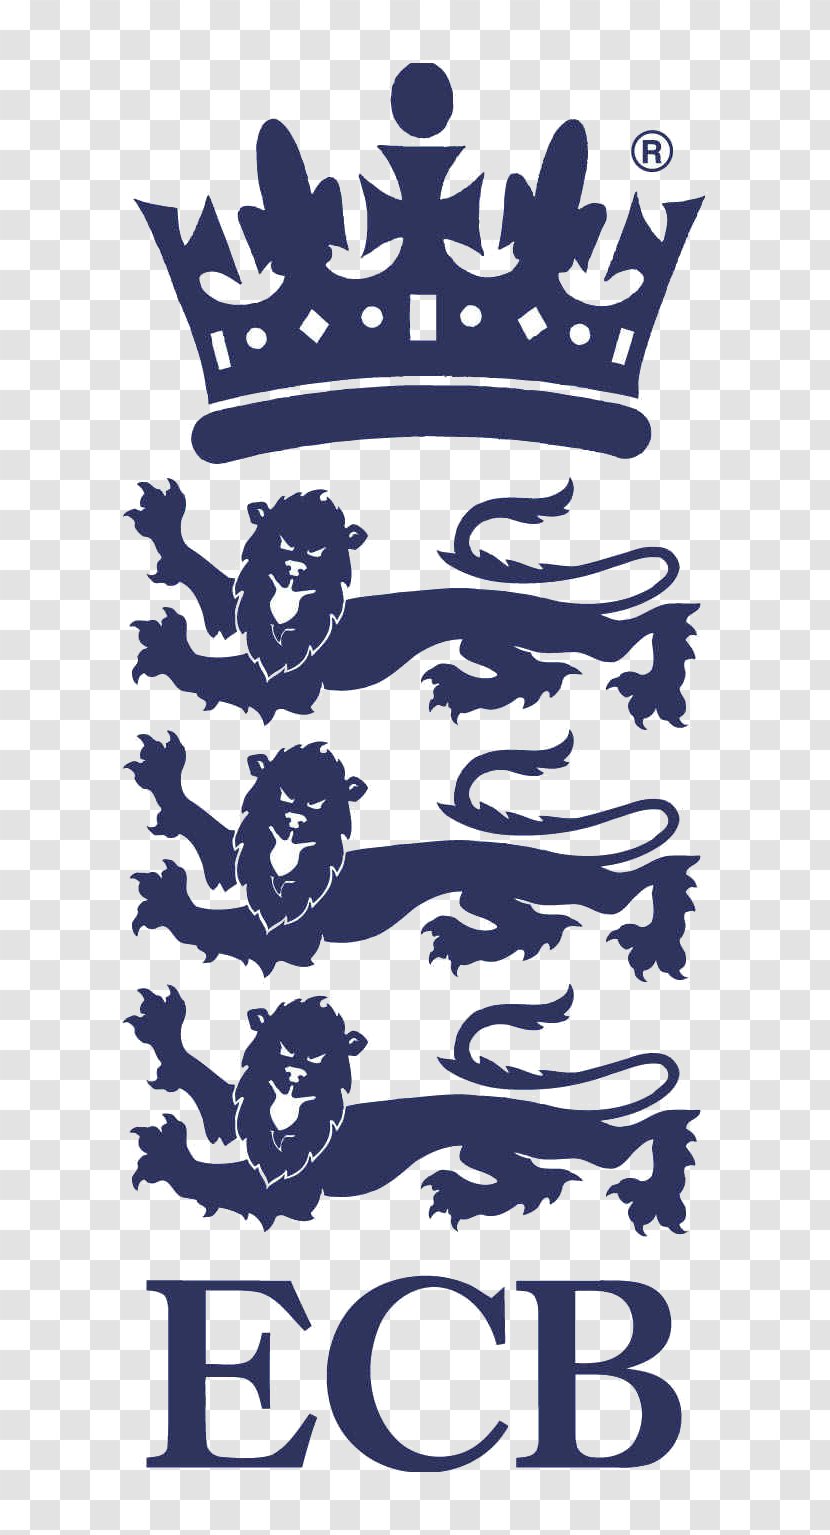 England Cricket Team And Wales Board World Cup Professional Cricketers' Association - Text Transparent PNG